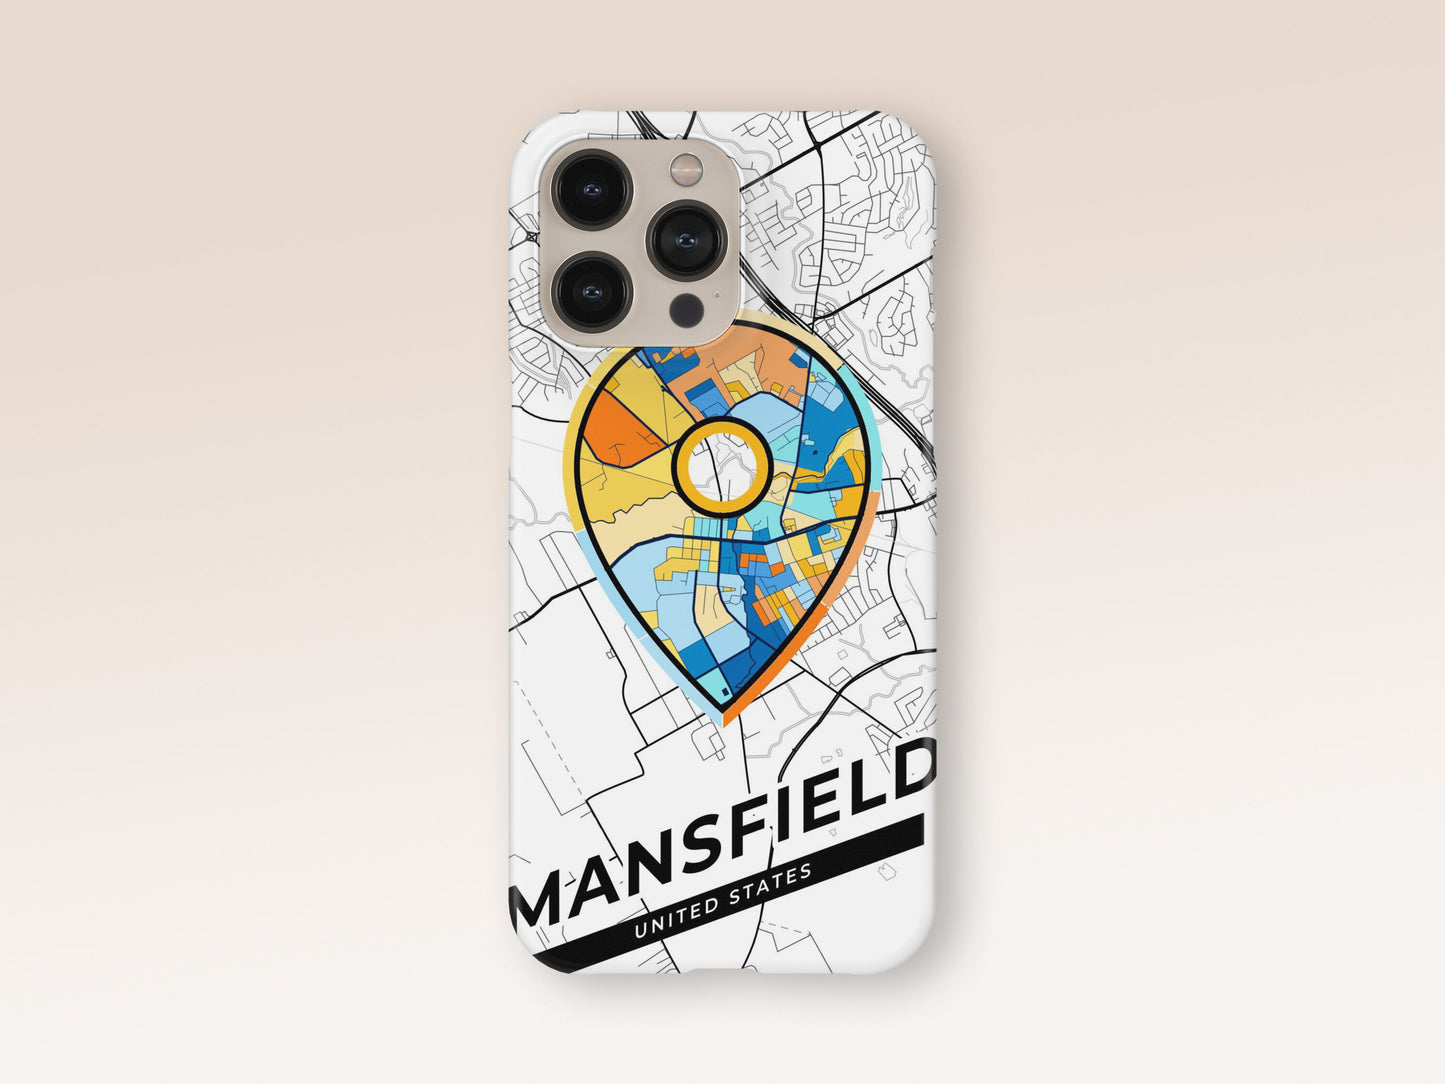 Mansfield Texas slim phone case with colorful icon. Birthday, wedding or housewarming gift. Couple match cases. 1